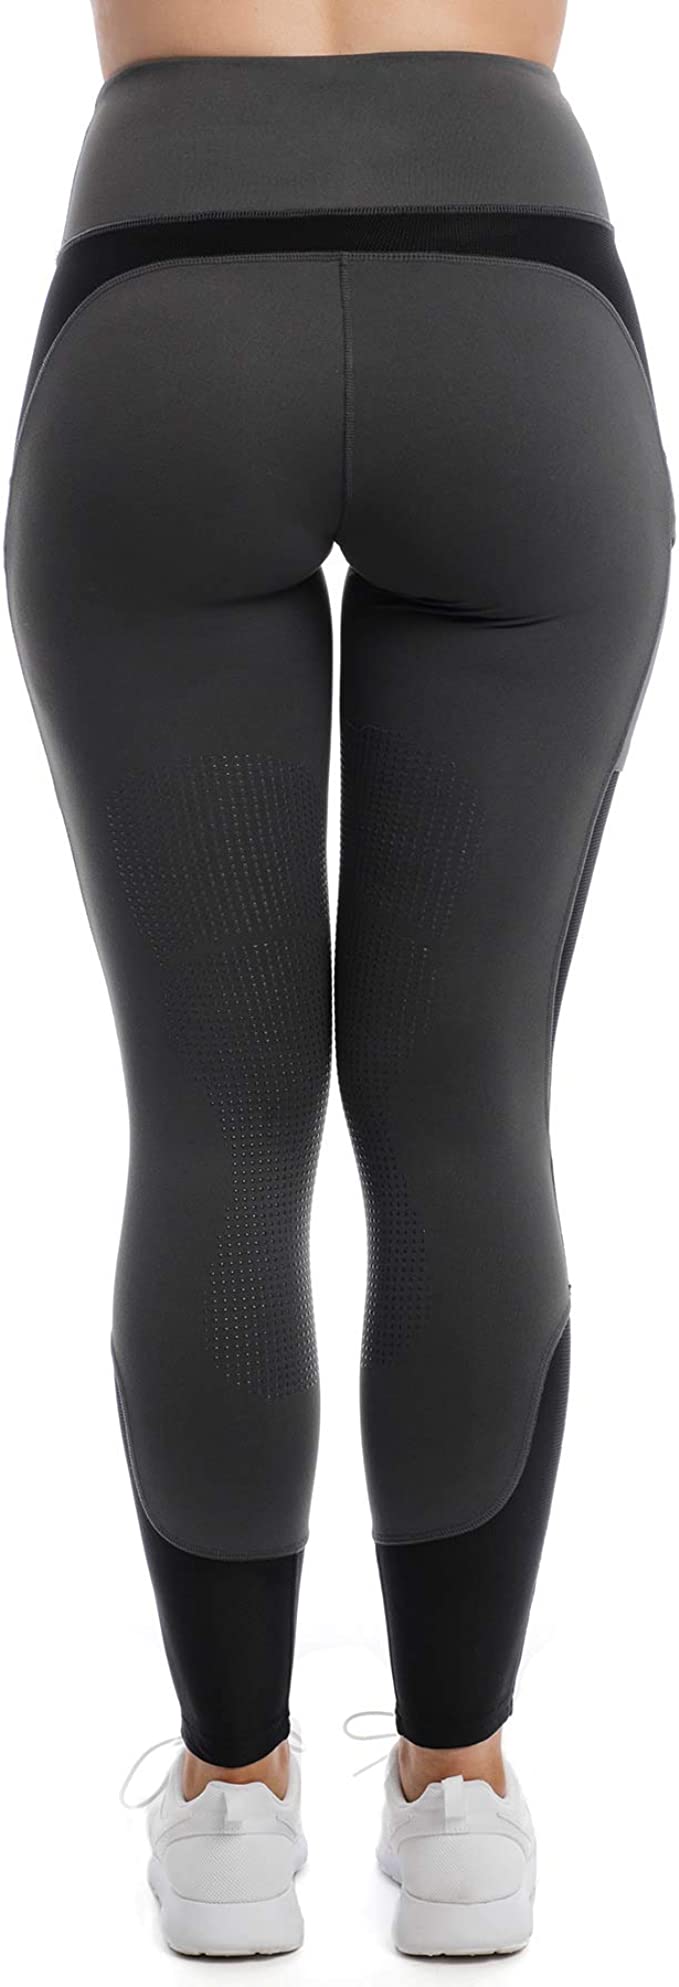 Back view of Charcoal Horseware Women's Silicon Riding Tights